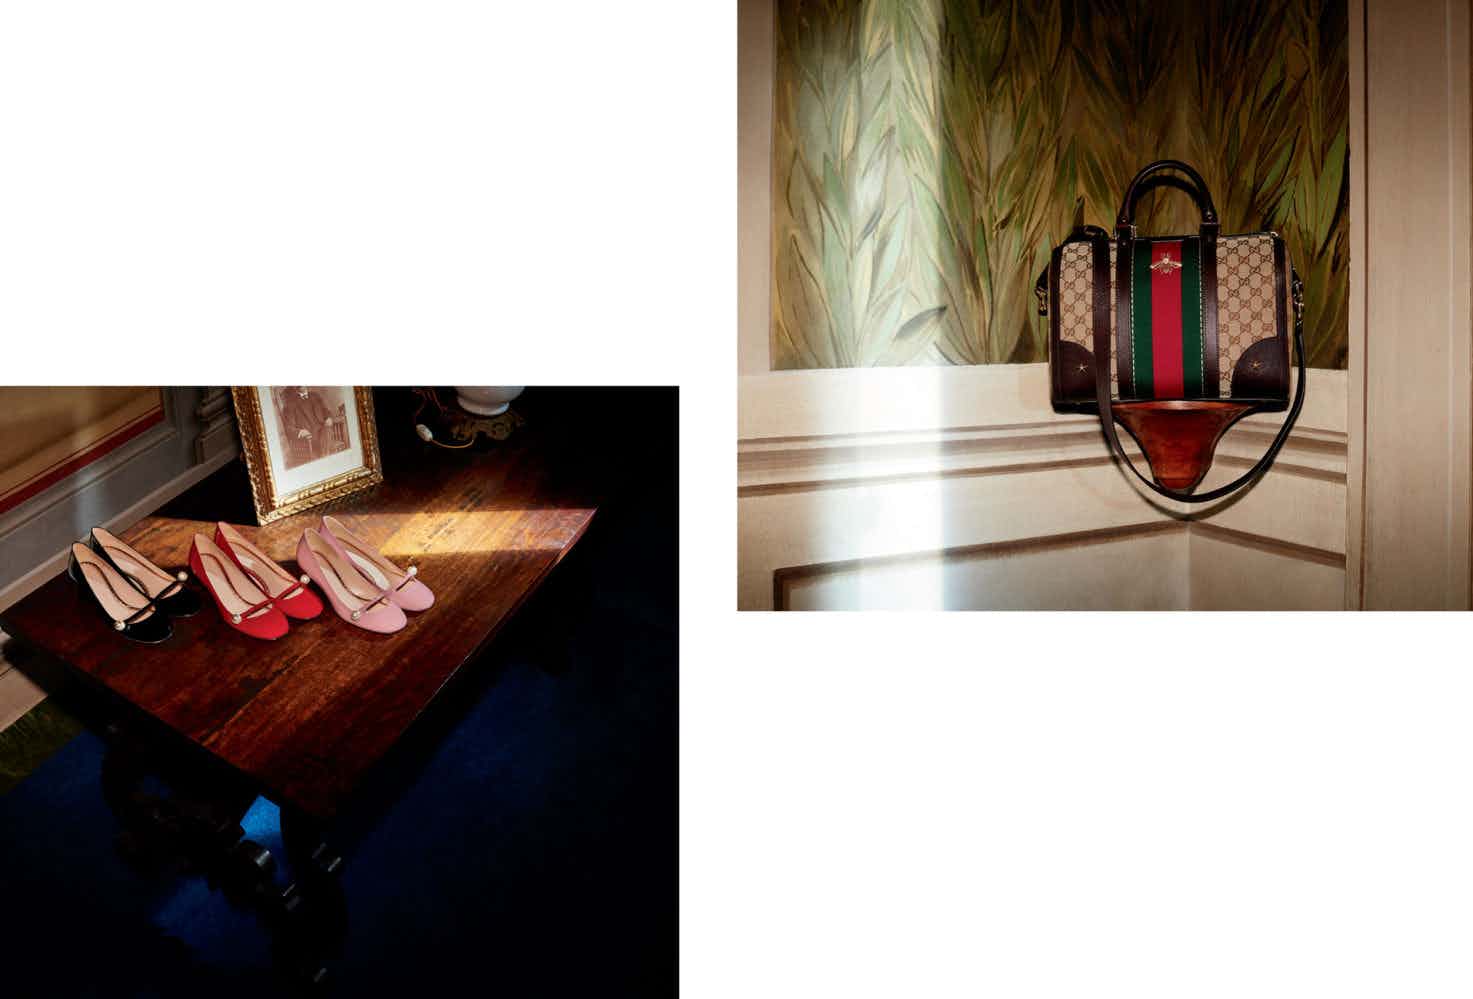 GUCCI - Cruise Accessories 2016
Photographer: Jack Webb
Location: Florence, IT